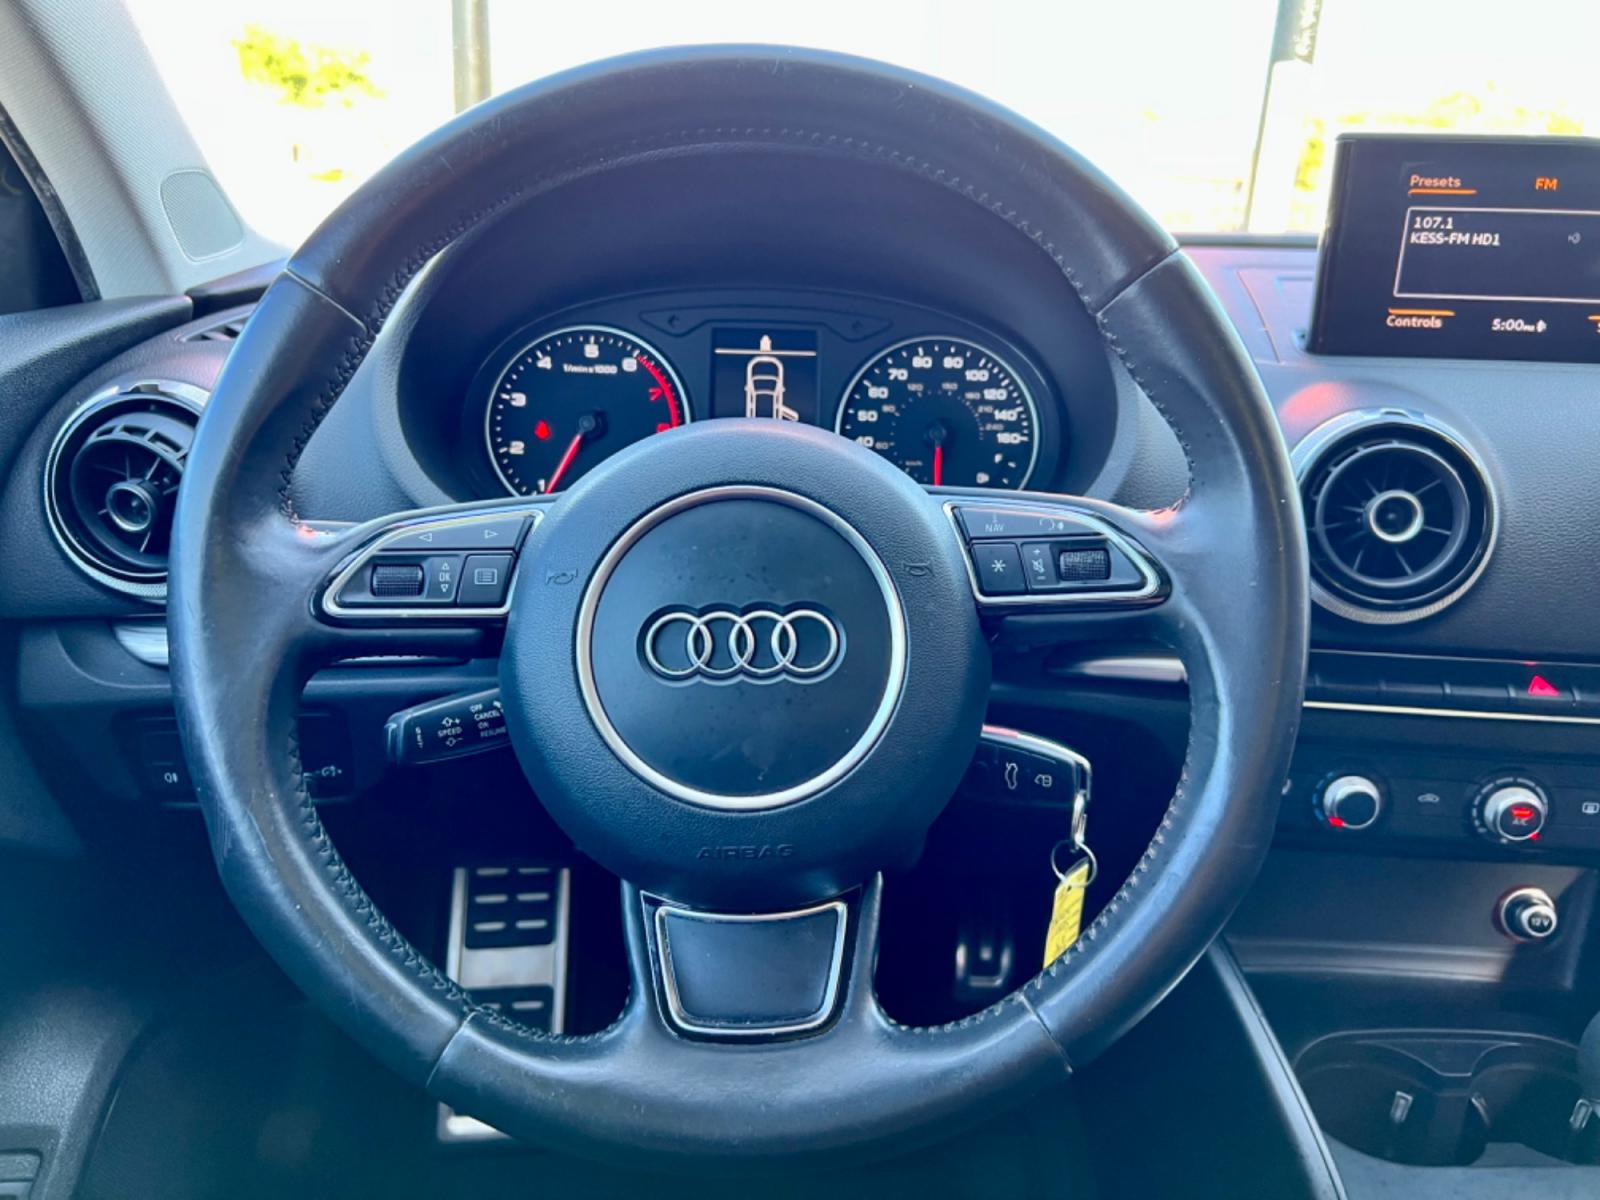 2015 WHITE AUDI A3 PREMIUM (WAUACGFF9F1) , located at 5900 E. Lancaster Ave., Fort Worth, TX, 76112, (817) 457-5456, 0.000000, 0.000000 - This is a 2015 AUDI A3 PREMIUM 4 DOOR SEDAN that is in excellent condition. There are no dents or scratches. The interior is clean with no rips or tears or stains. All power windows, door locks and seats. Ice cold AC for those hot Texas summer days. It is equipped with a CD player, AM/FM radio, AUX - Photo #18